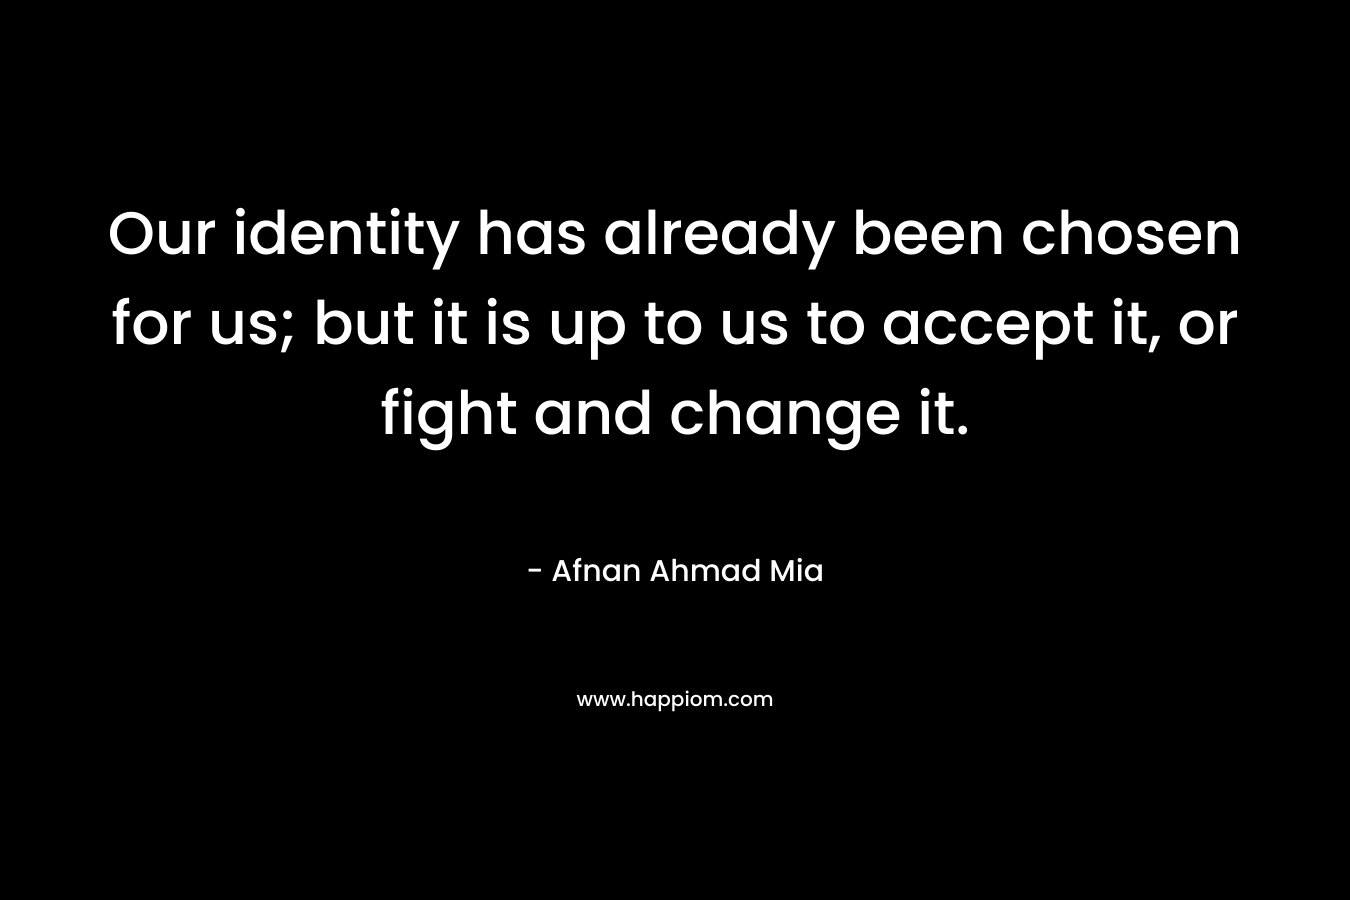 Our identity has already been chosen for us; but it is up to us to accept it, or fight and change it.